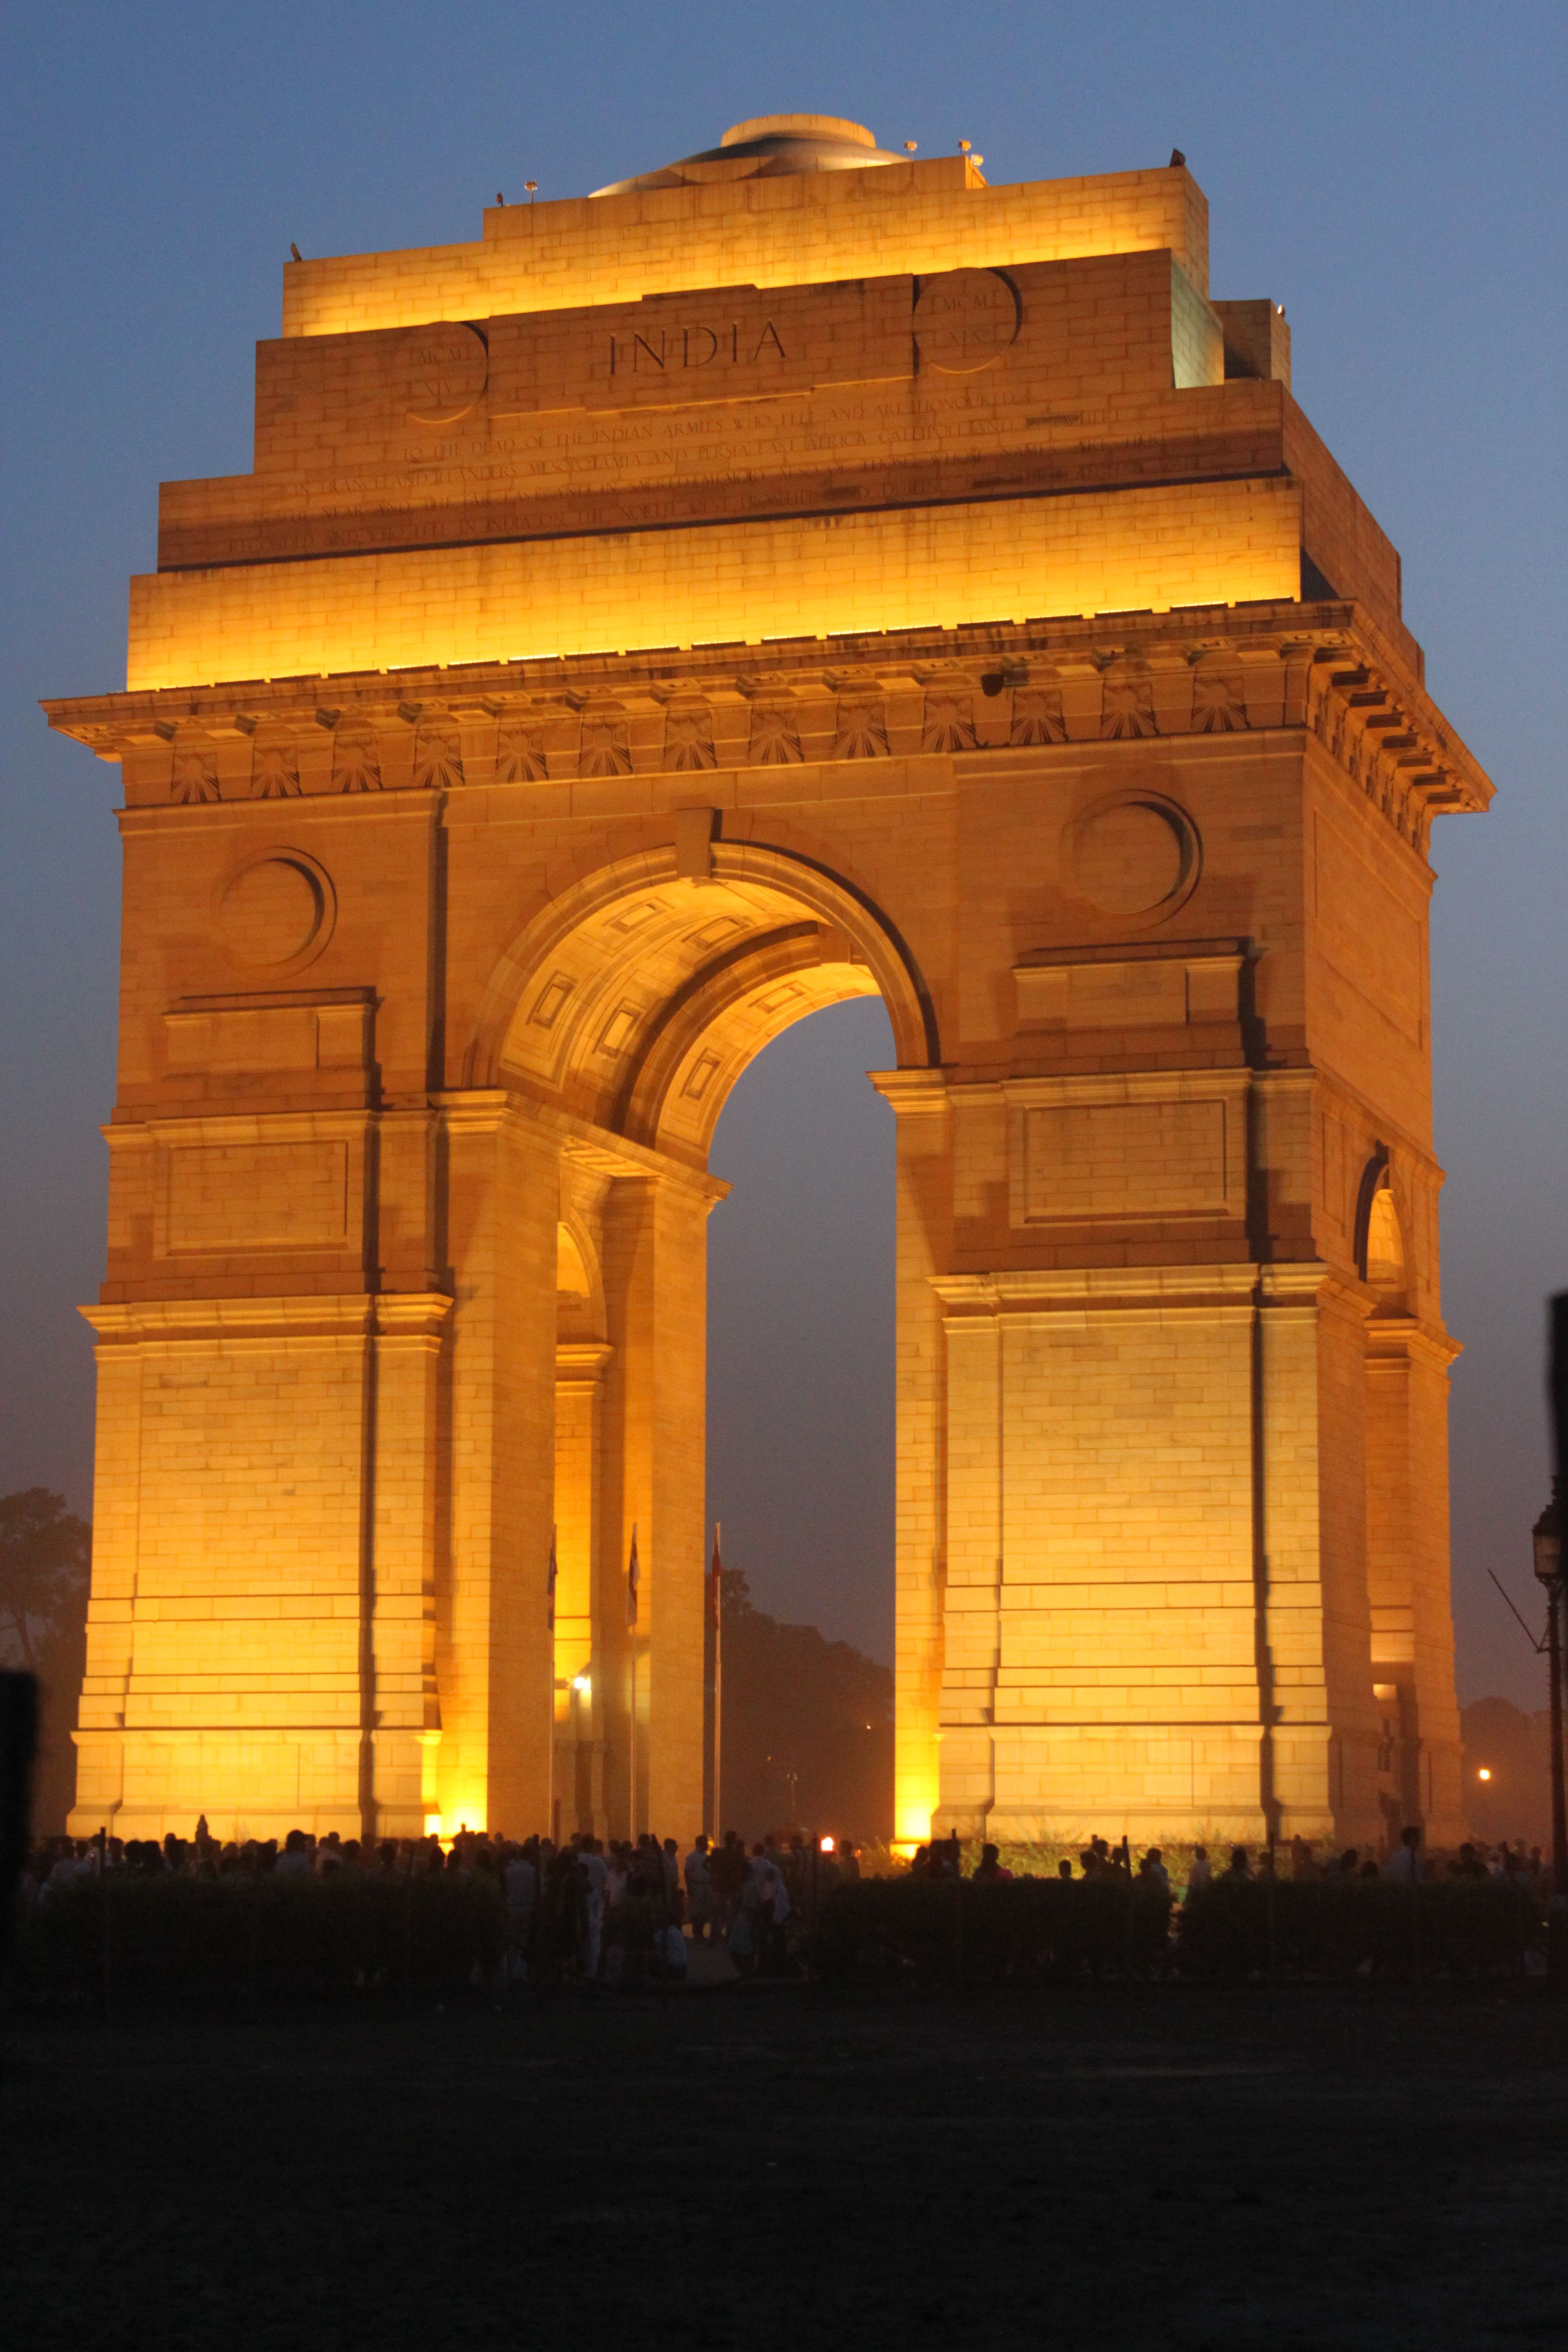 Indian soldiers pay their respects at the India Gate, New Delhi